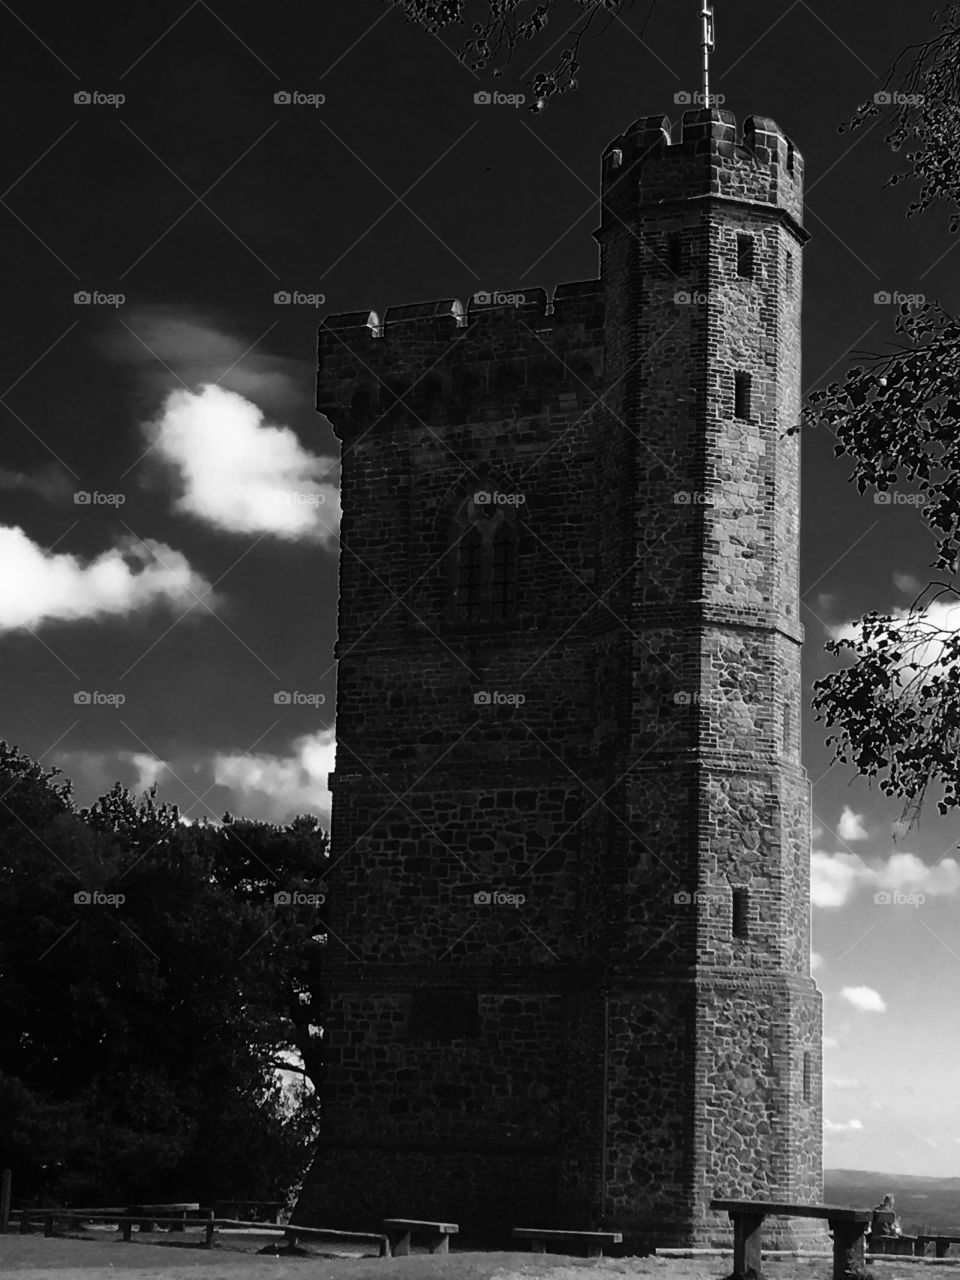 Leith Hill Tower